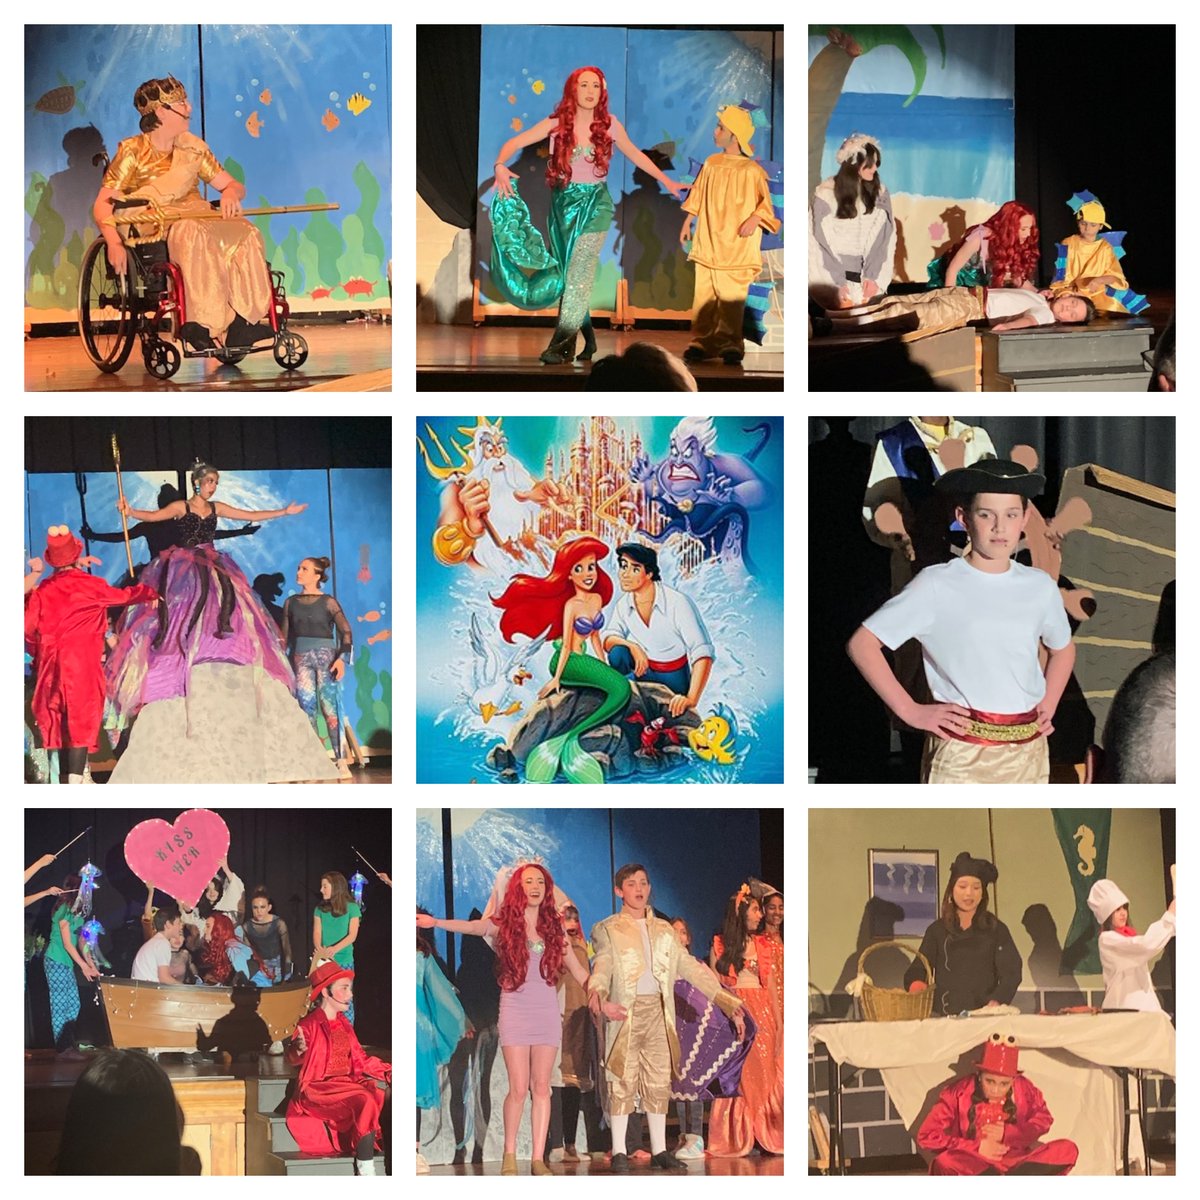 UTMS students put on a great production of The Little Mermaid this evening for the opening show! 🦀🤴🧜‍♀️🧜‍♂️ @UnionTownshipHC 👏